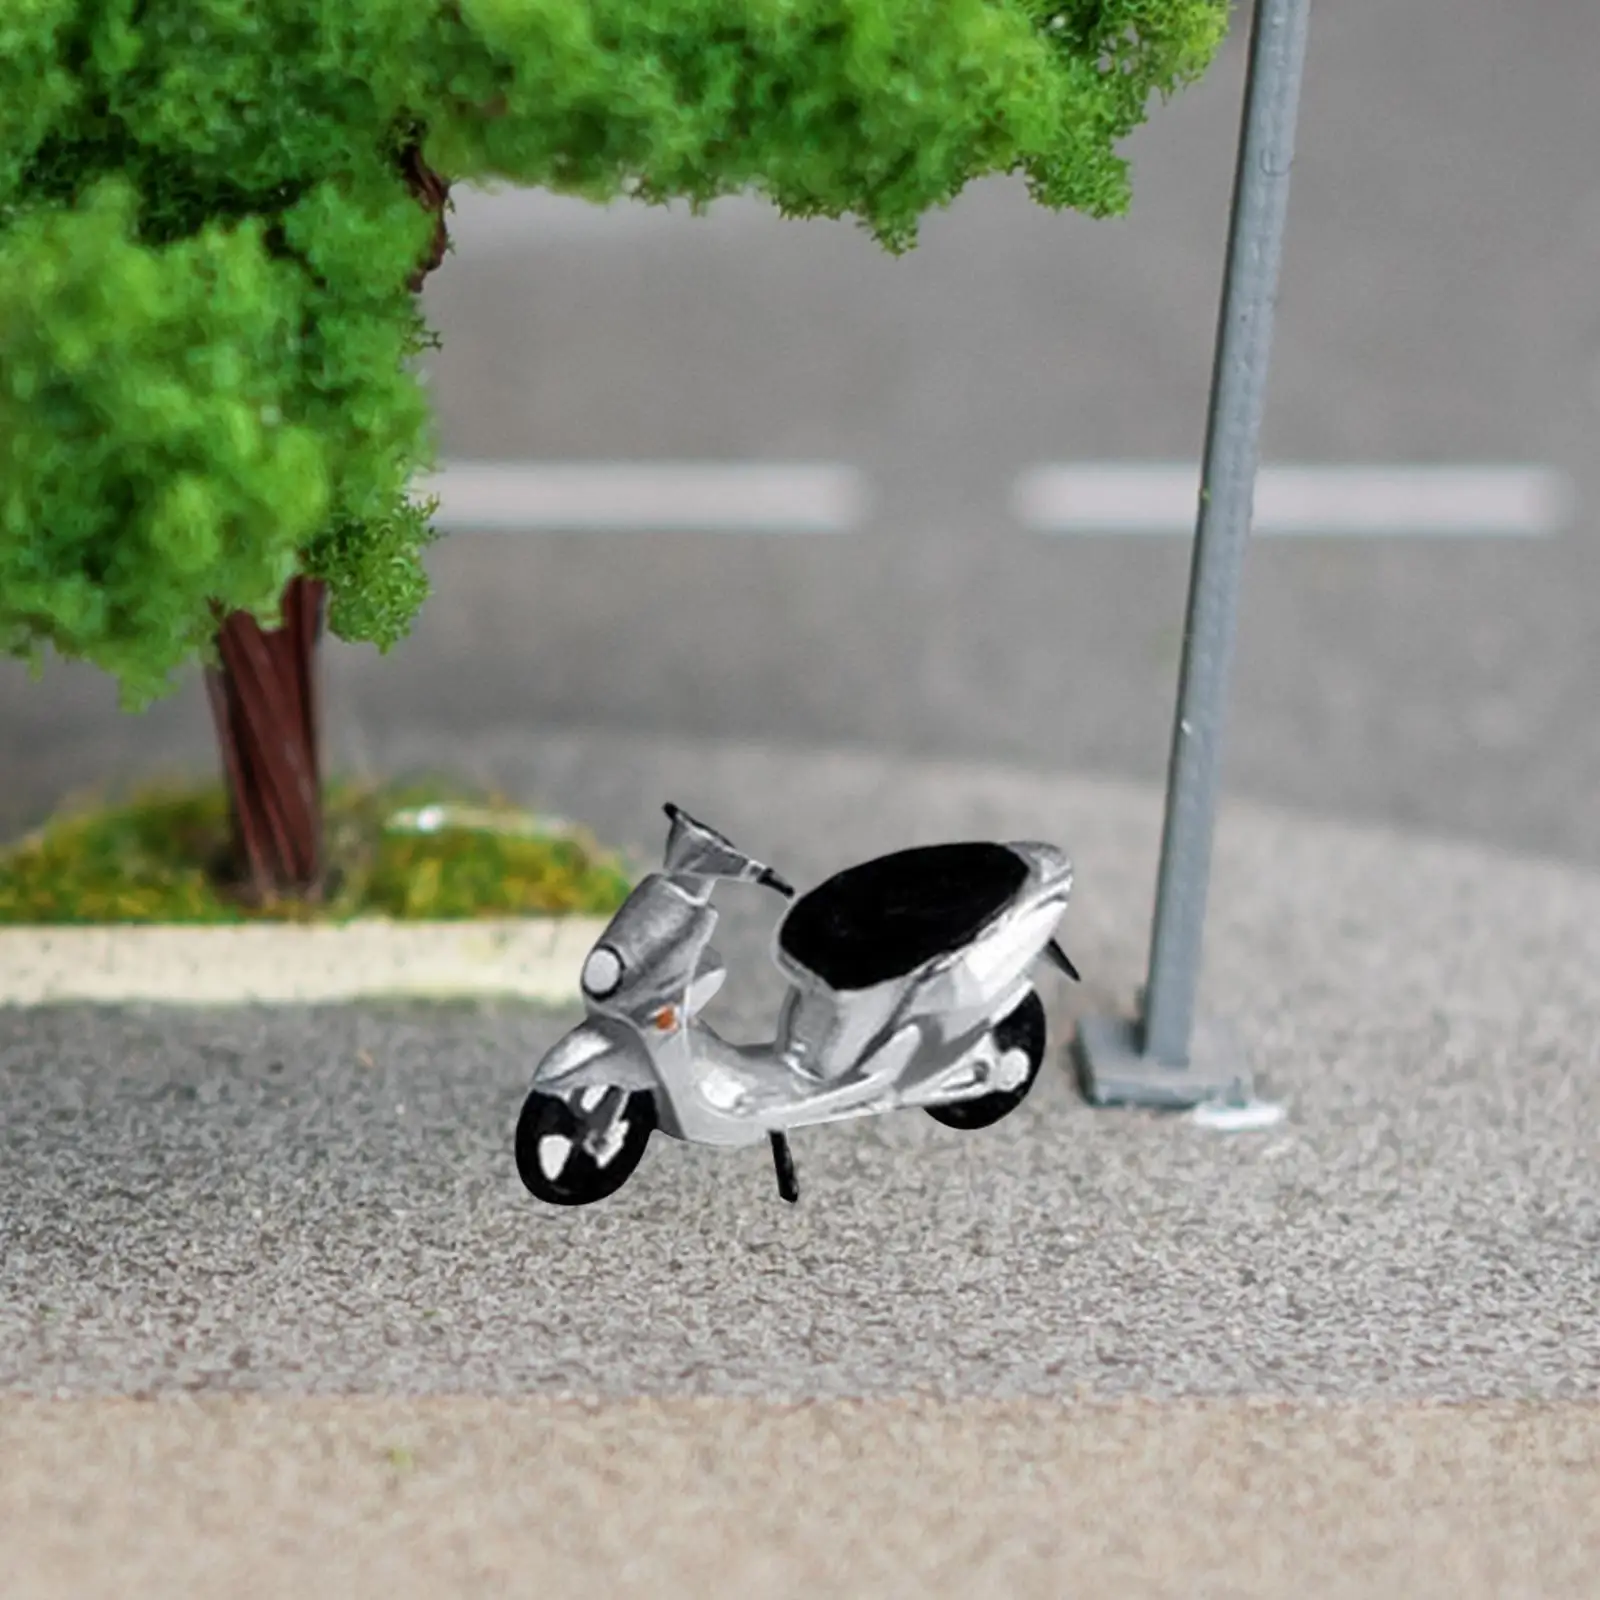 1:64 Diorama Street Motorcycle Model Realistic Mini Vehicles Toys for Micro Landscapes Dollhouse Photography Props Accessories